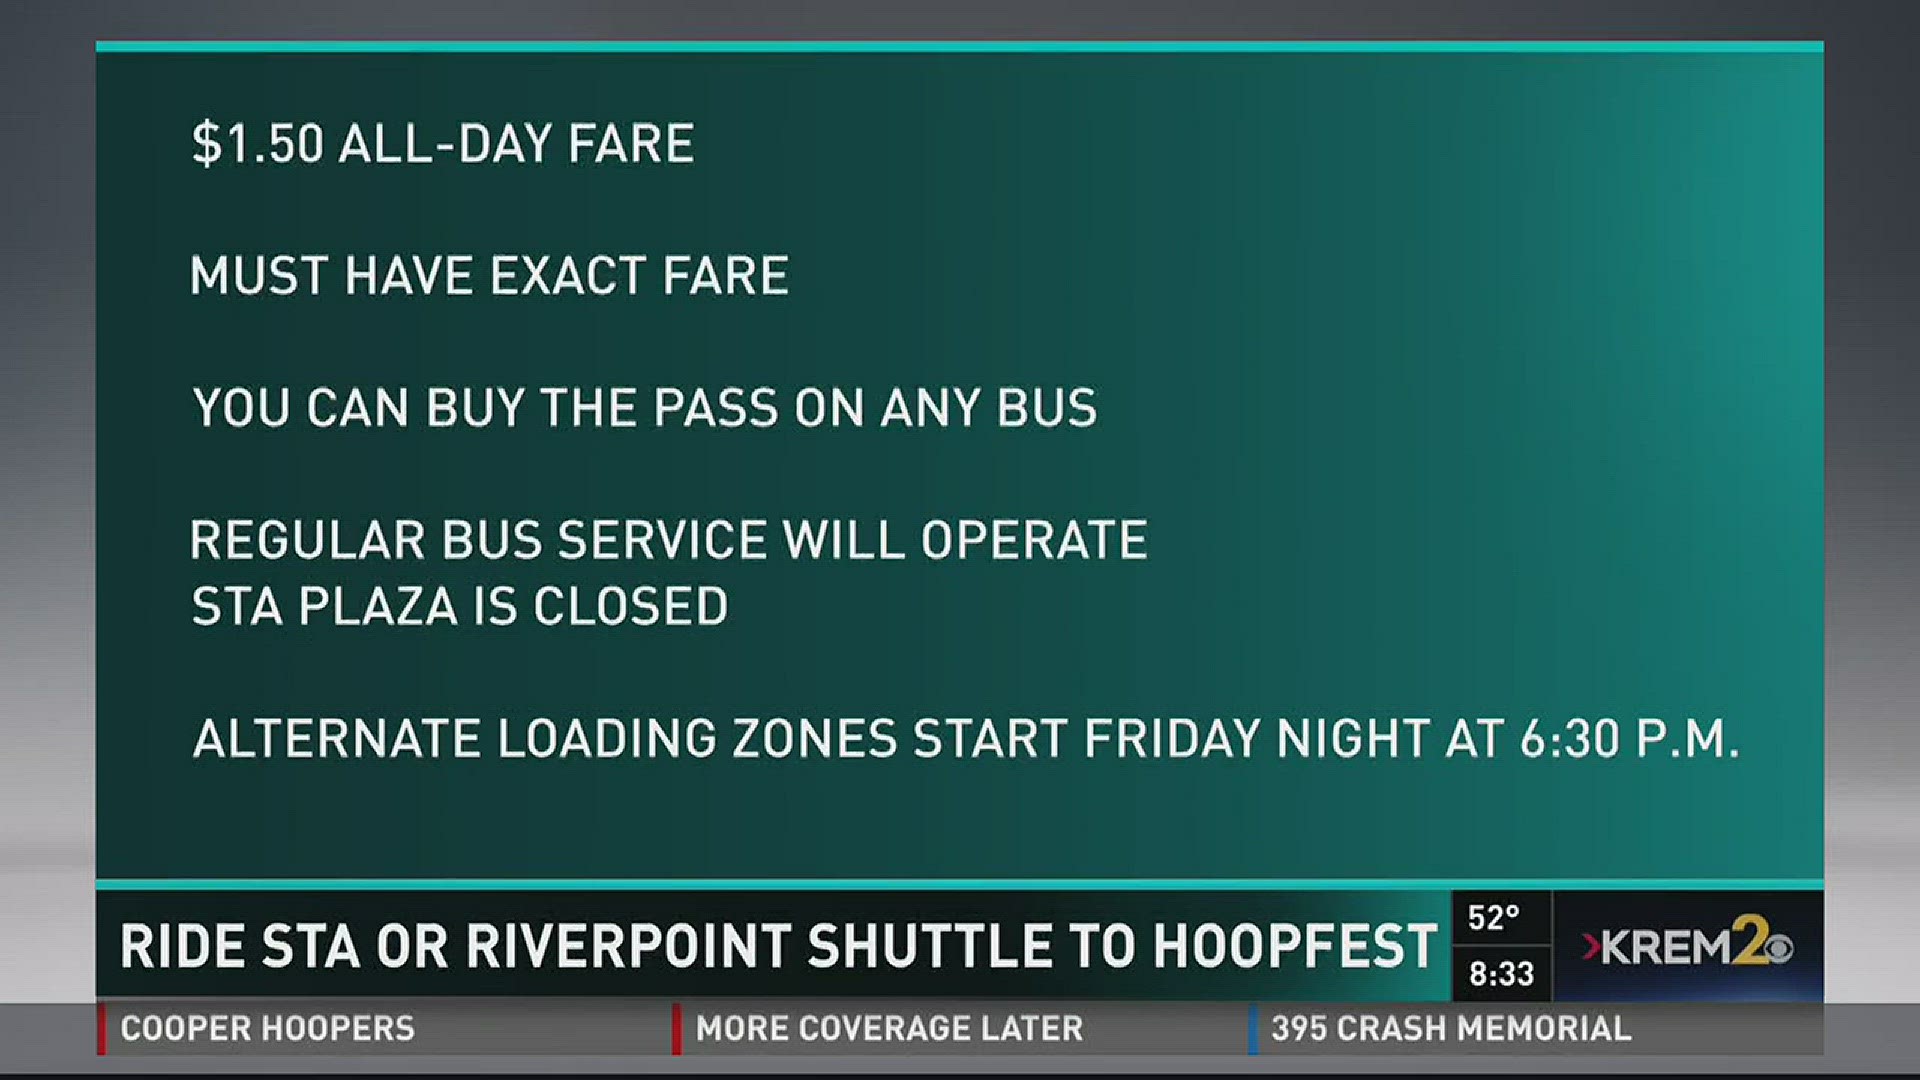 Spokane Transit only costs a $1.50 -- that's an all-day fare.